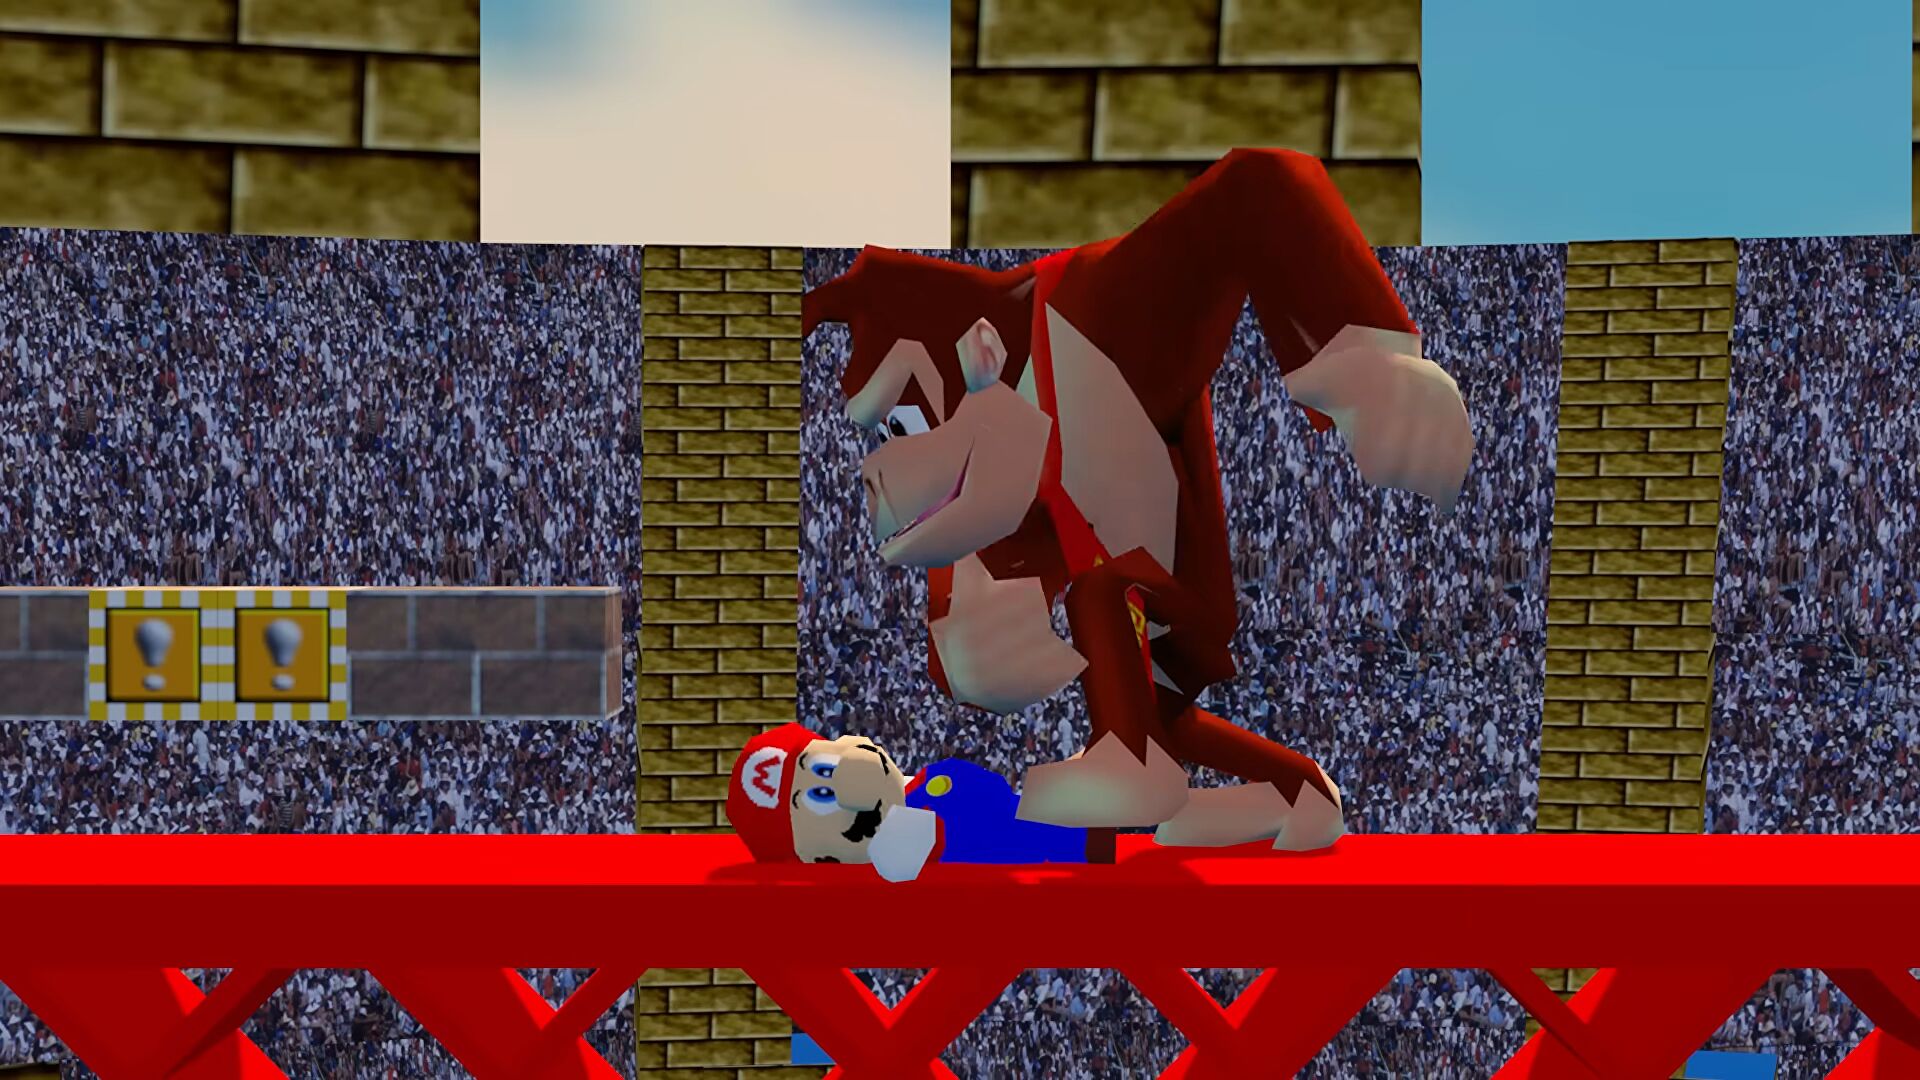 Fan recreates The Super Mario Movie trailer with N64 graphics